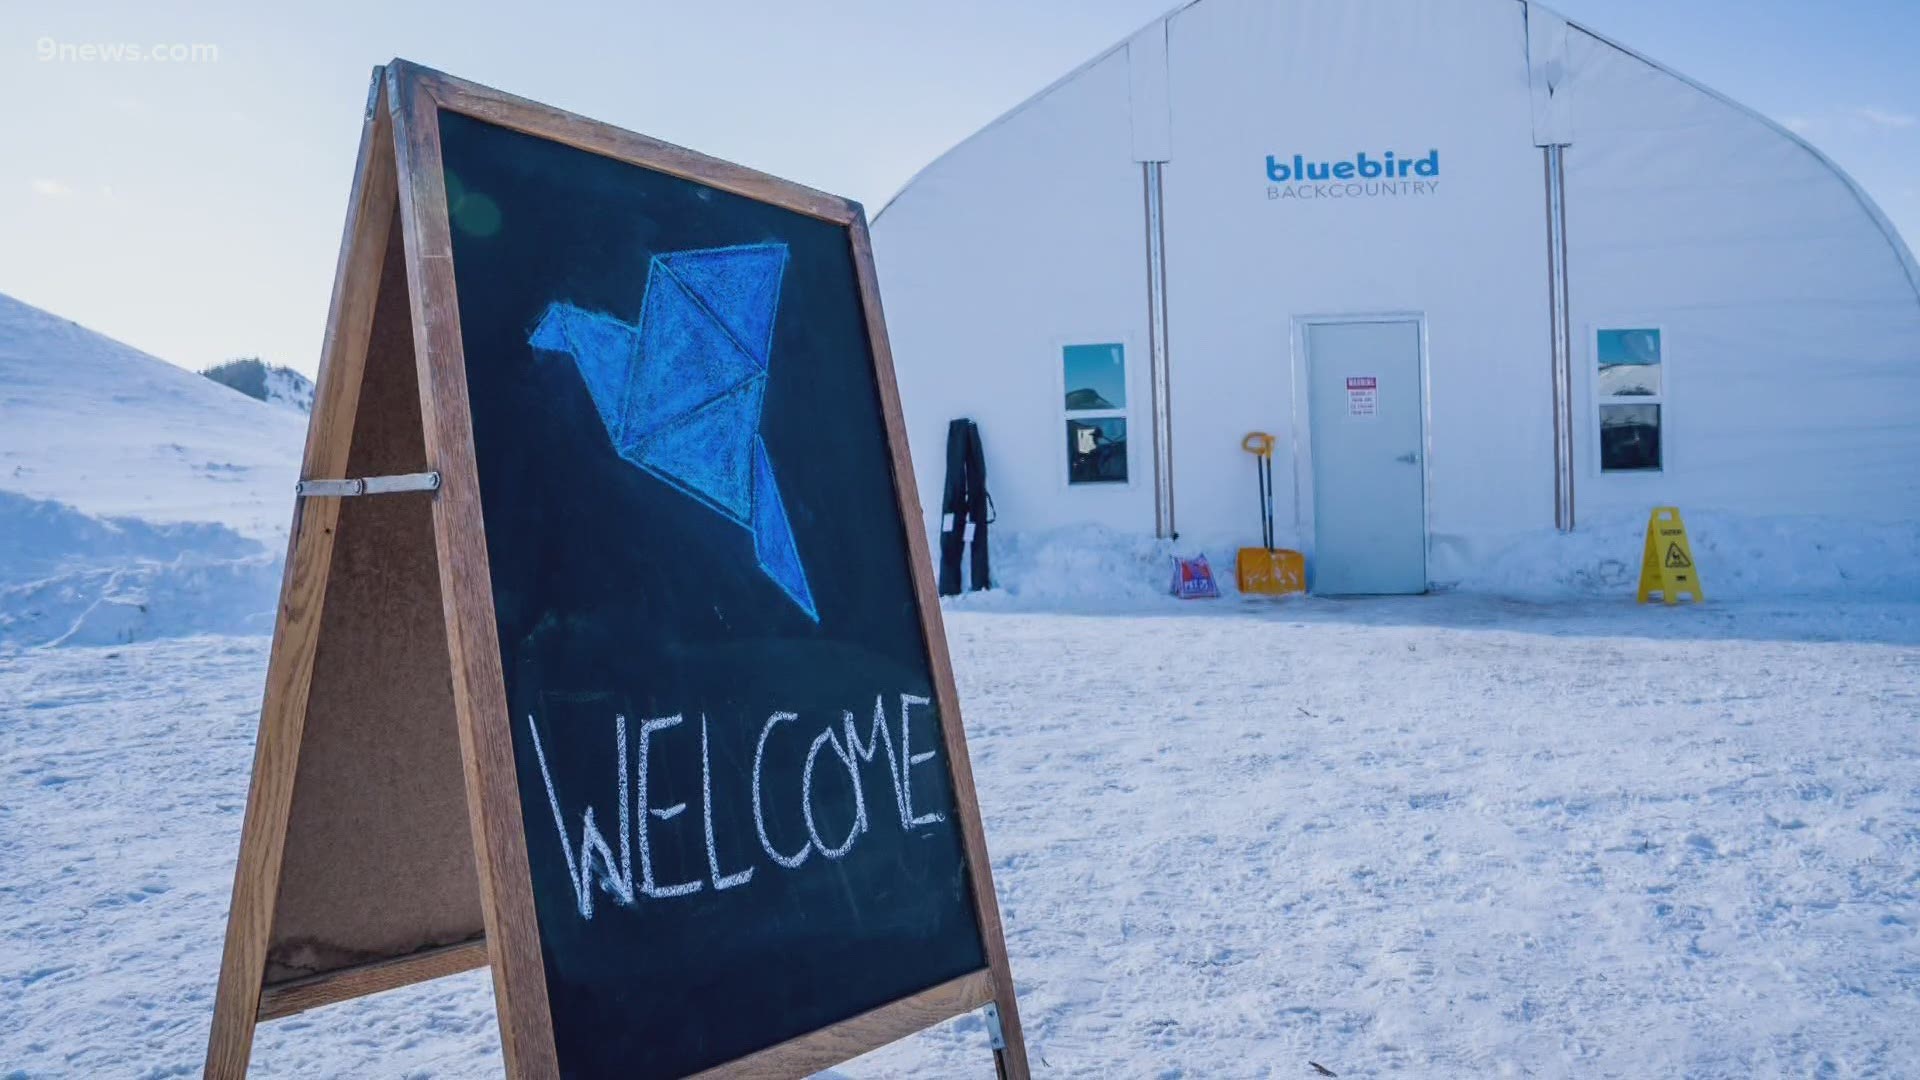 Bluebird Backcountry offers a different experience from a traditional resort.